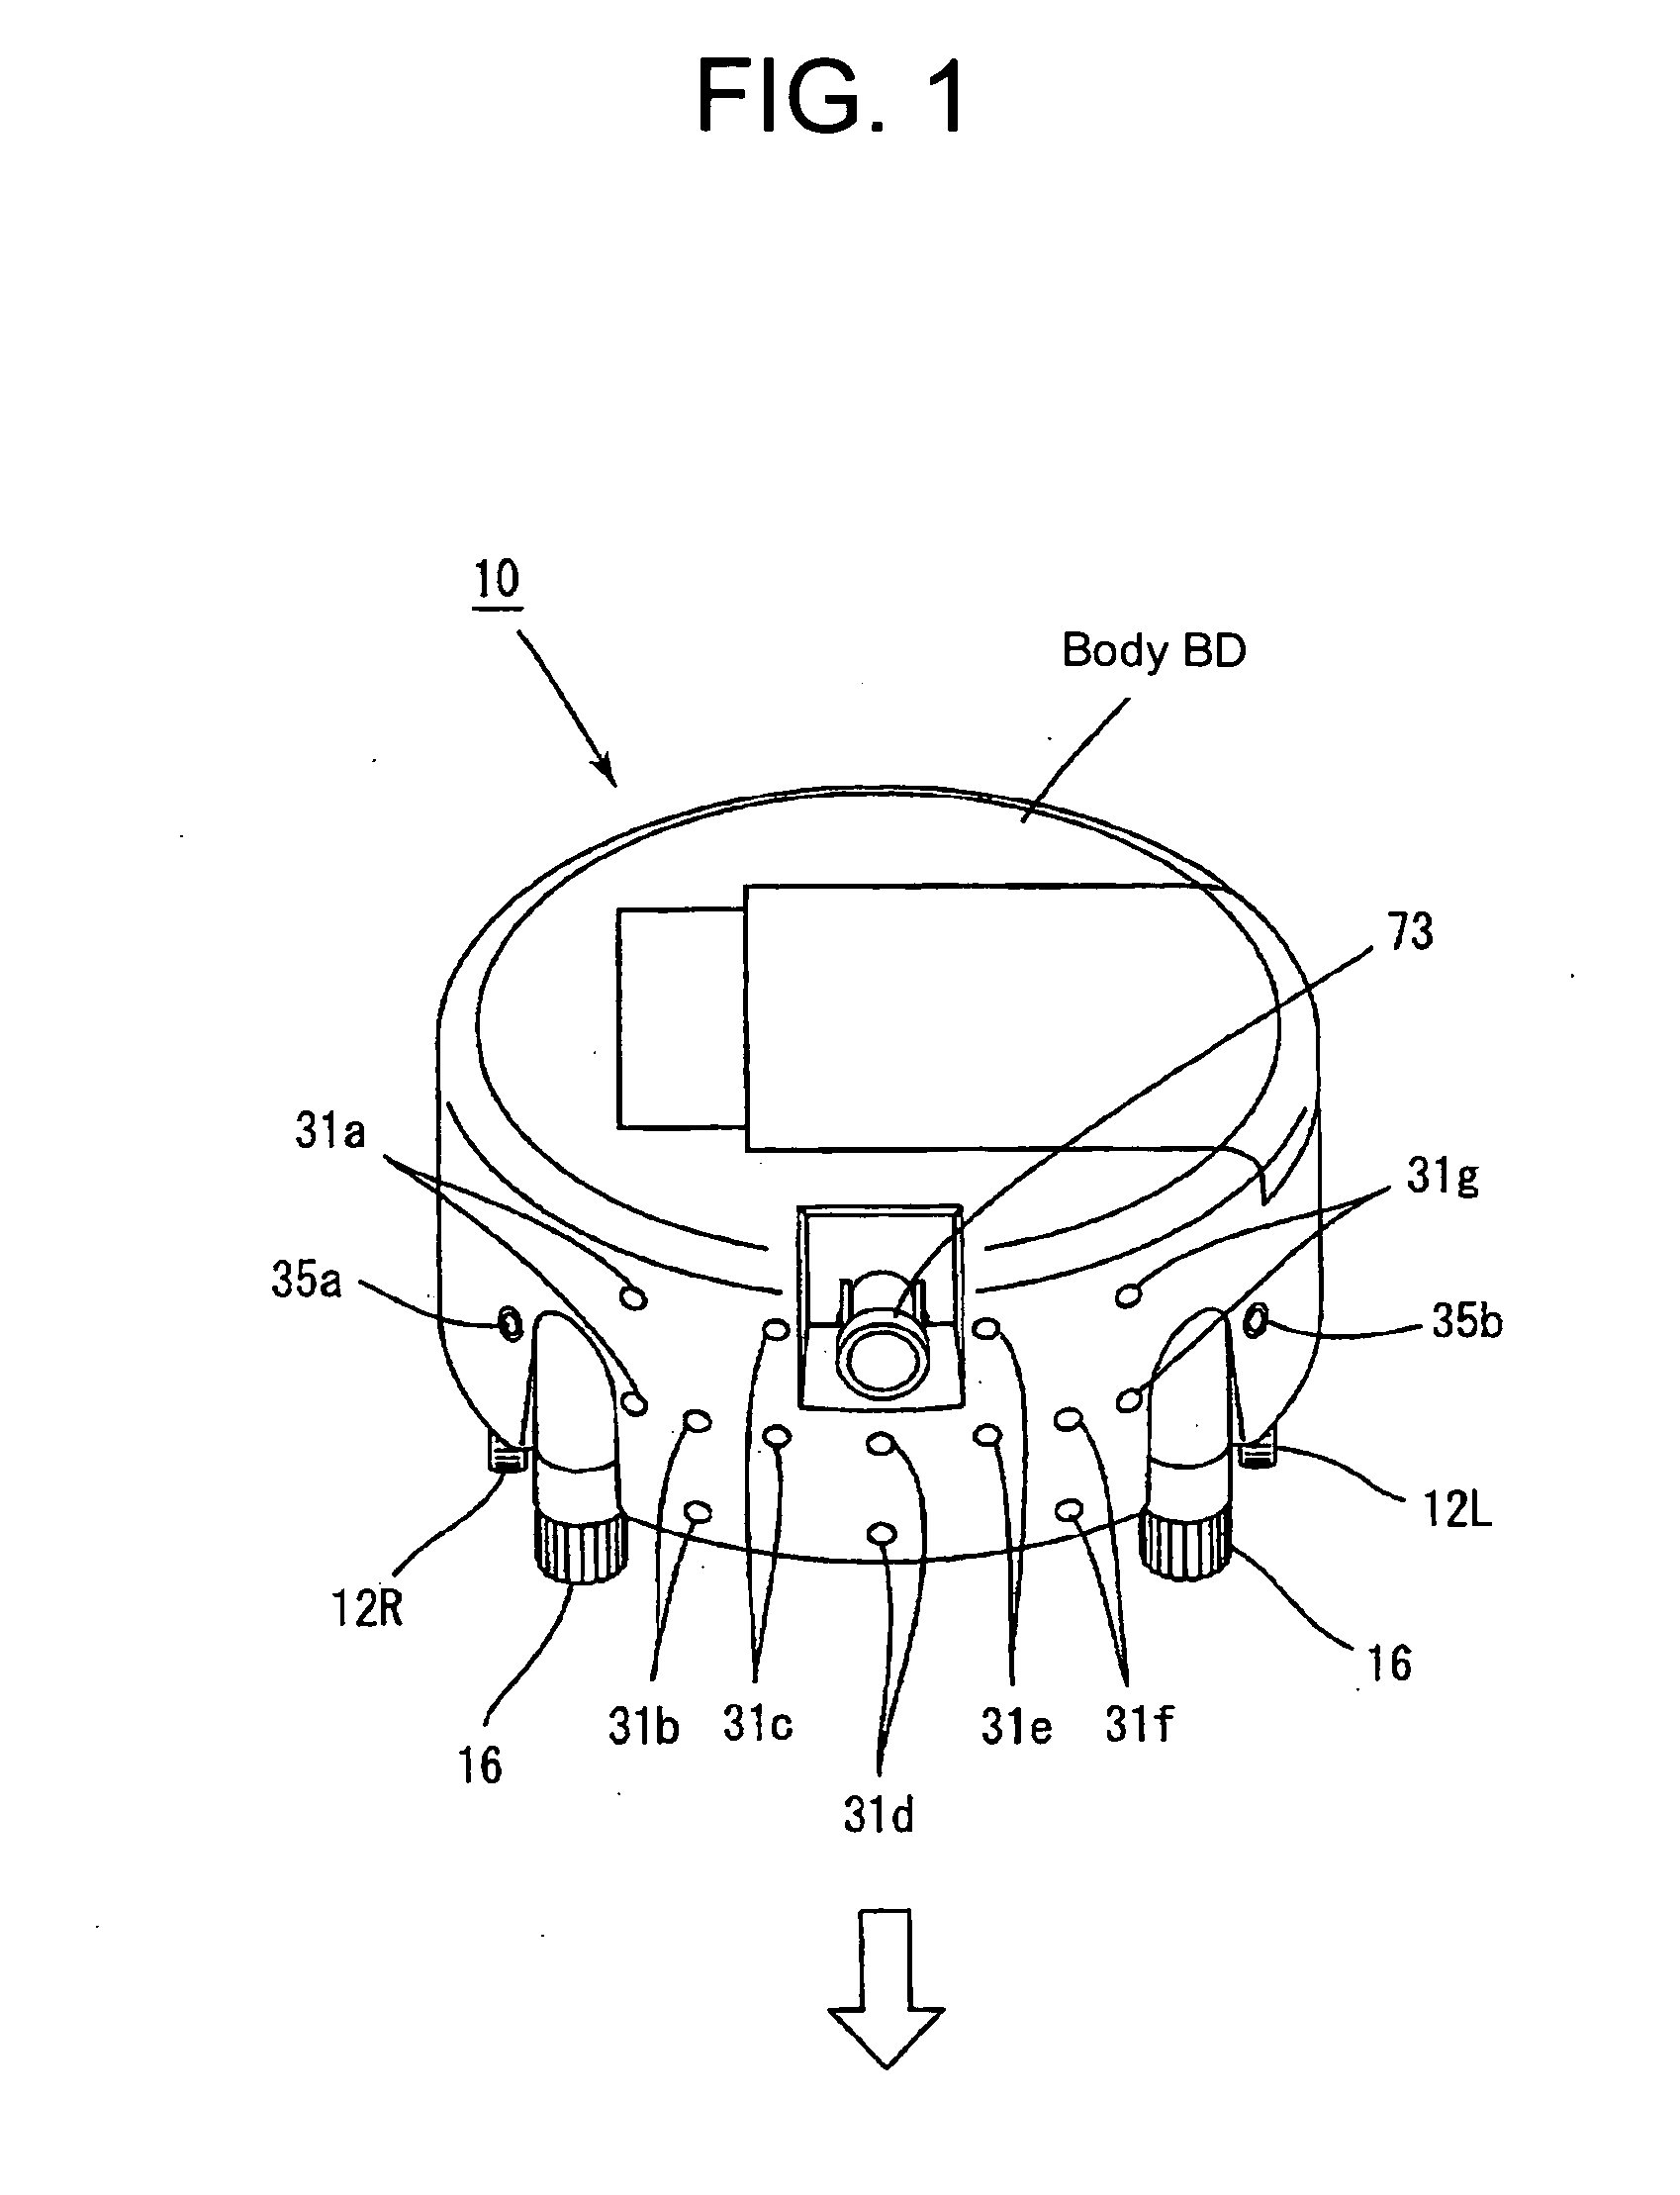 Travel device and self-propelled cleaner